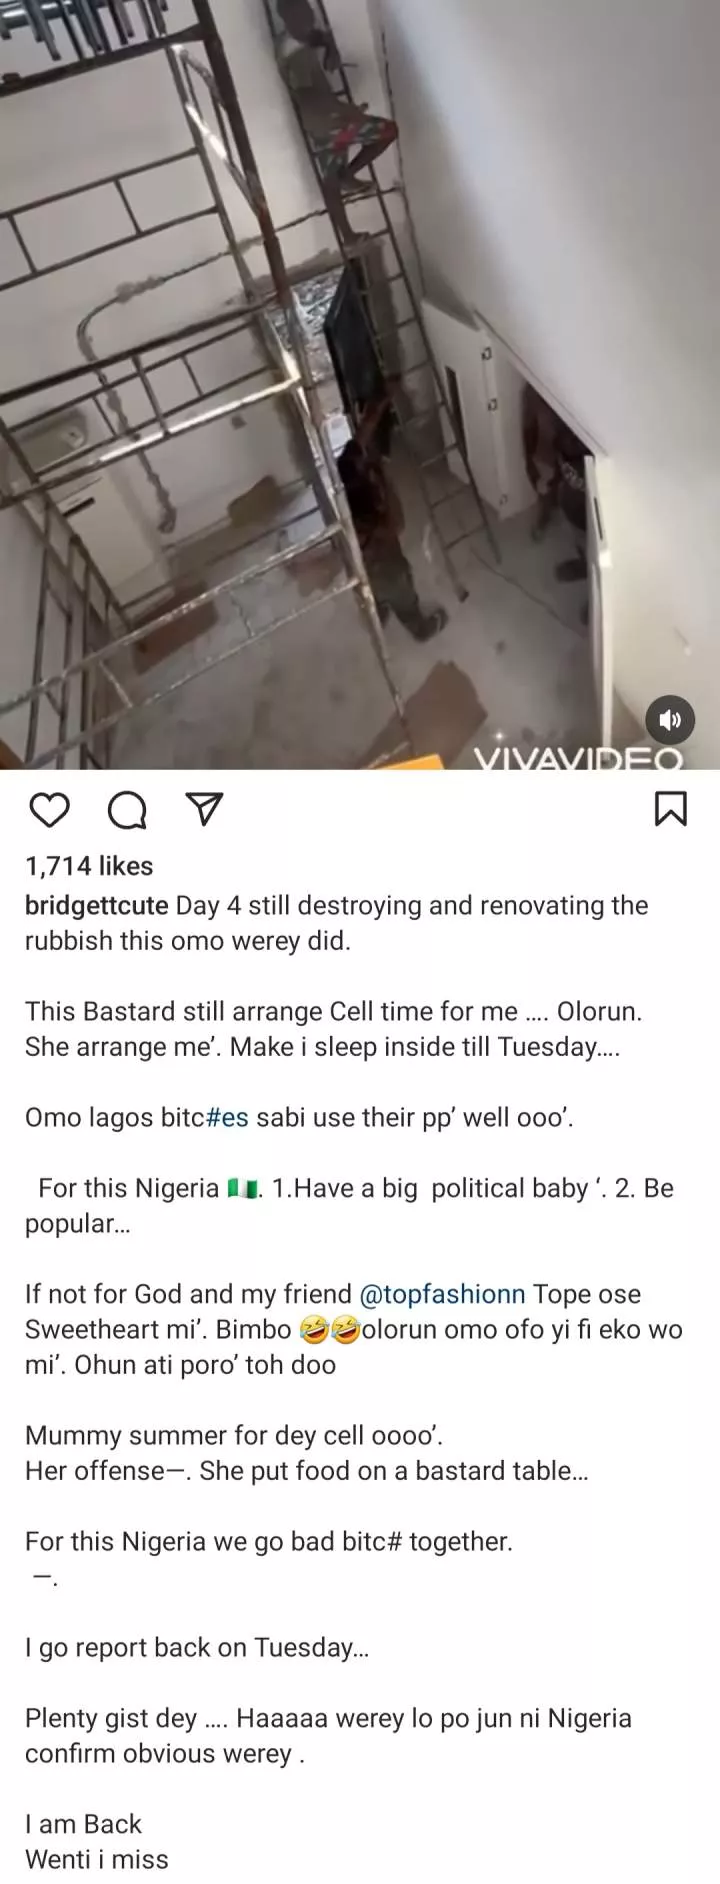 Heartstopping moment businesswoman nearly plunged down a top-floor railing while being assaulted by Nollywood actress Bridgett Missa (video)